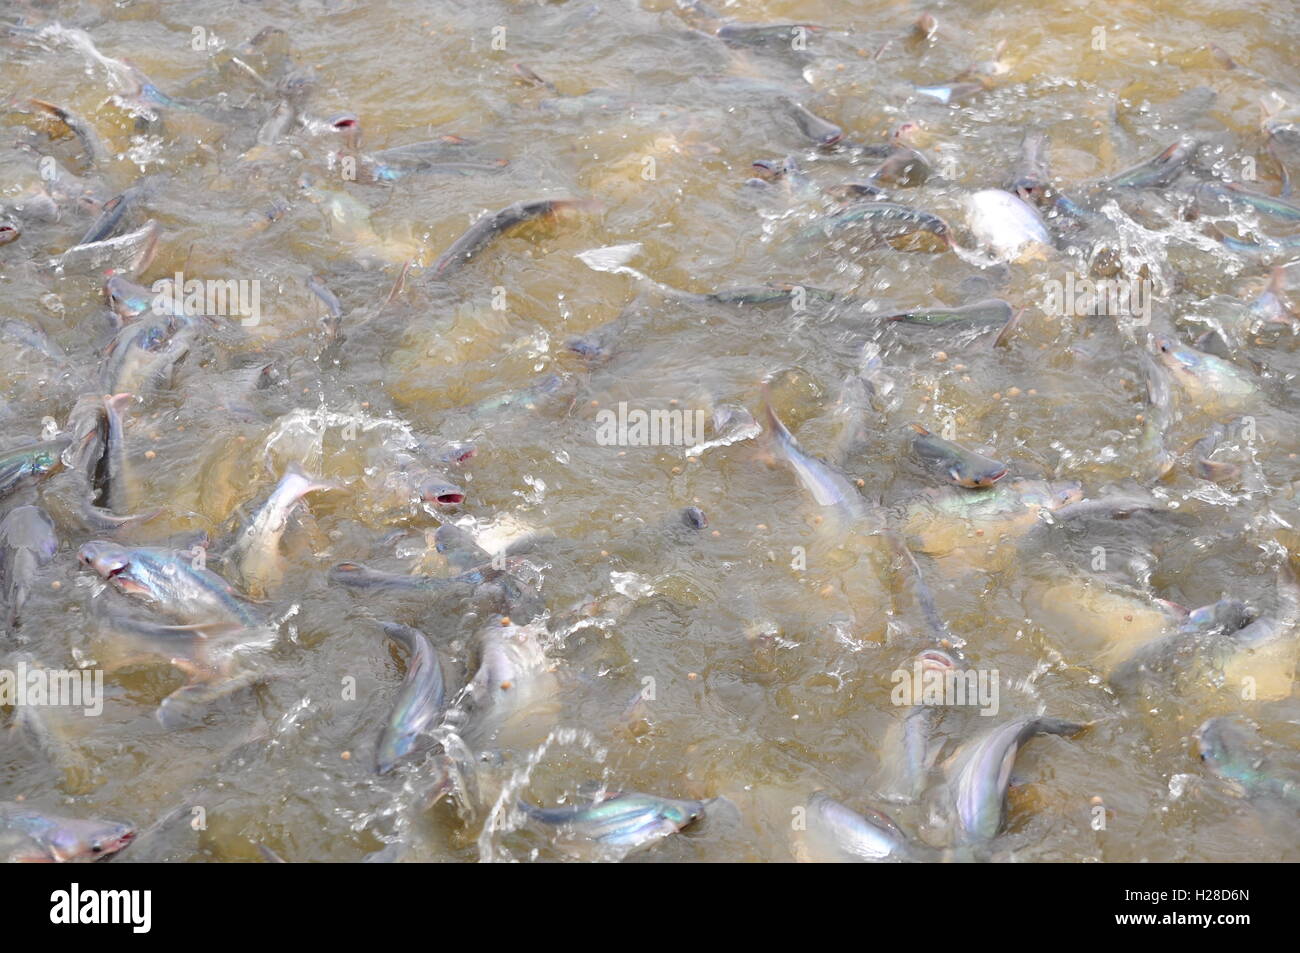 Pangasius fish or Vietnamese catfish are scrambling to eat in a farming pond Stock Photo